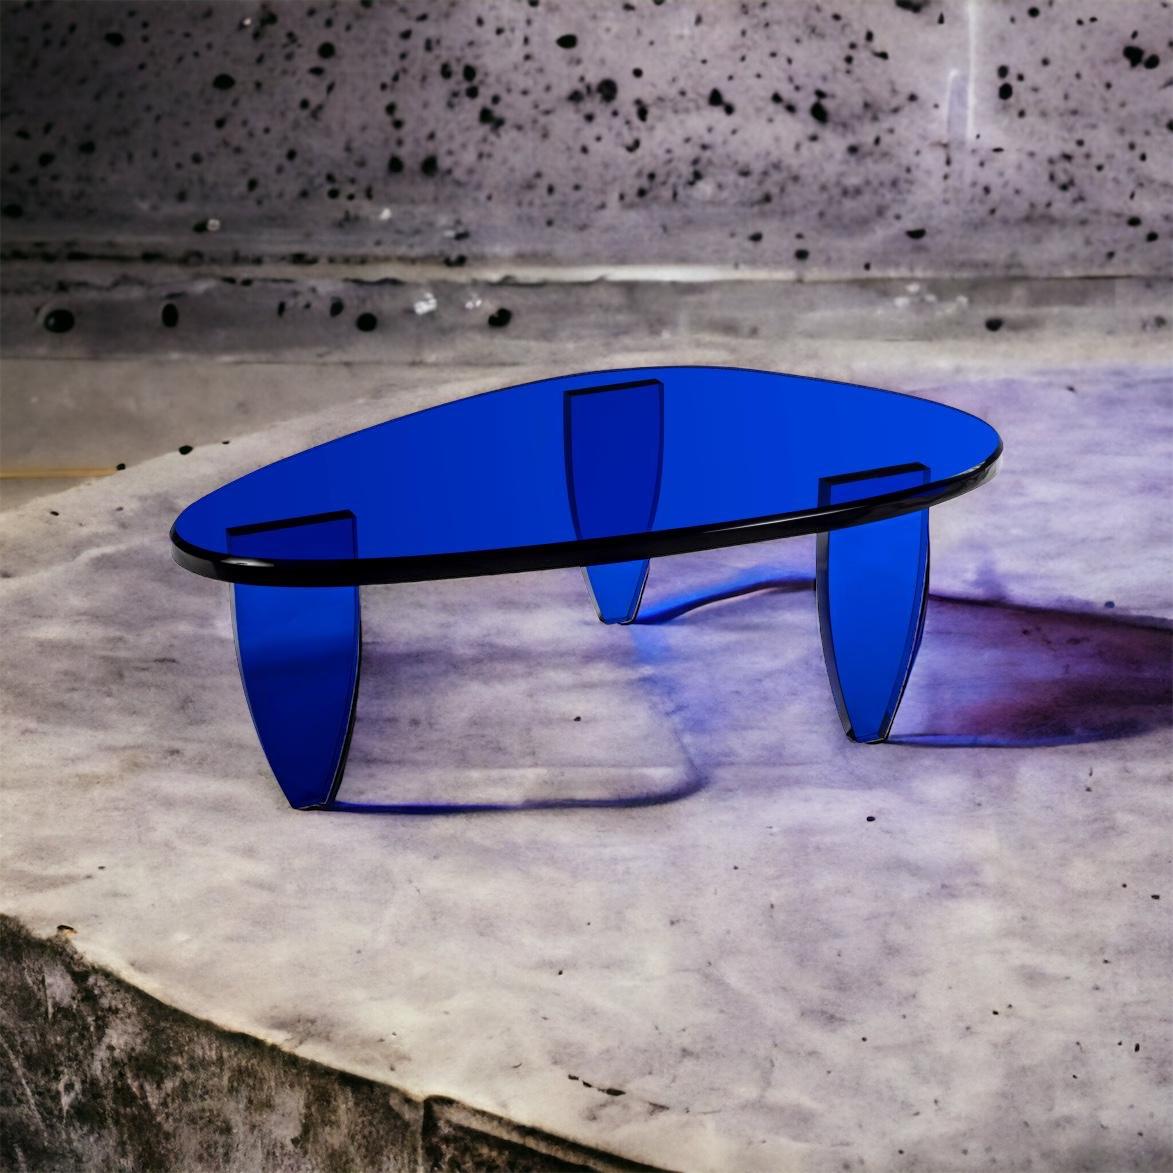 Candy Blue Outre Mer Coffee Table by Charly Bounan
One of a Kind
Dimensions: D 73 x W 119 x H 40 cm. 
Materials: Acrylic glass.

Also available in different colors. Please contact us.

Charly Bounan, is a Parisian designer renowned for its refined